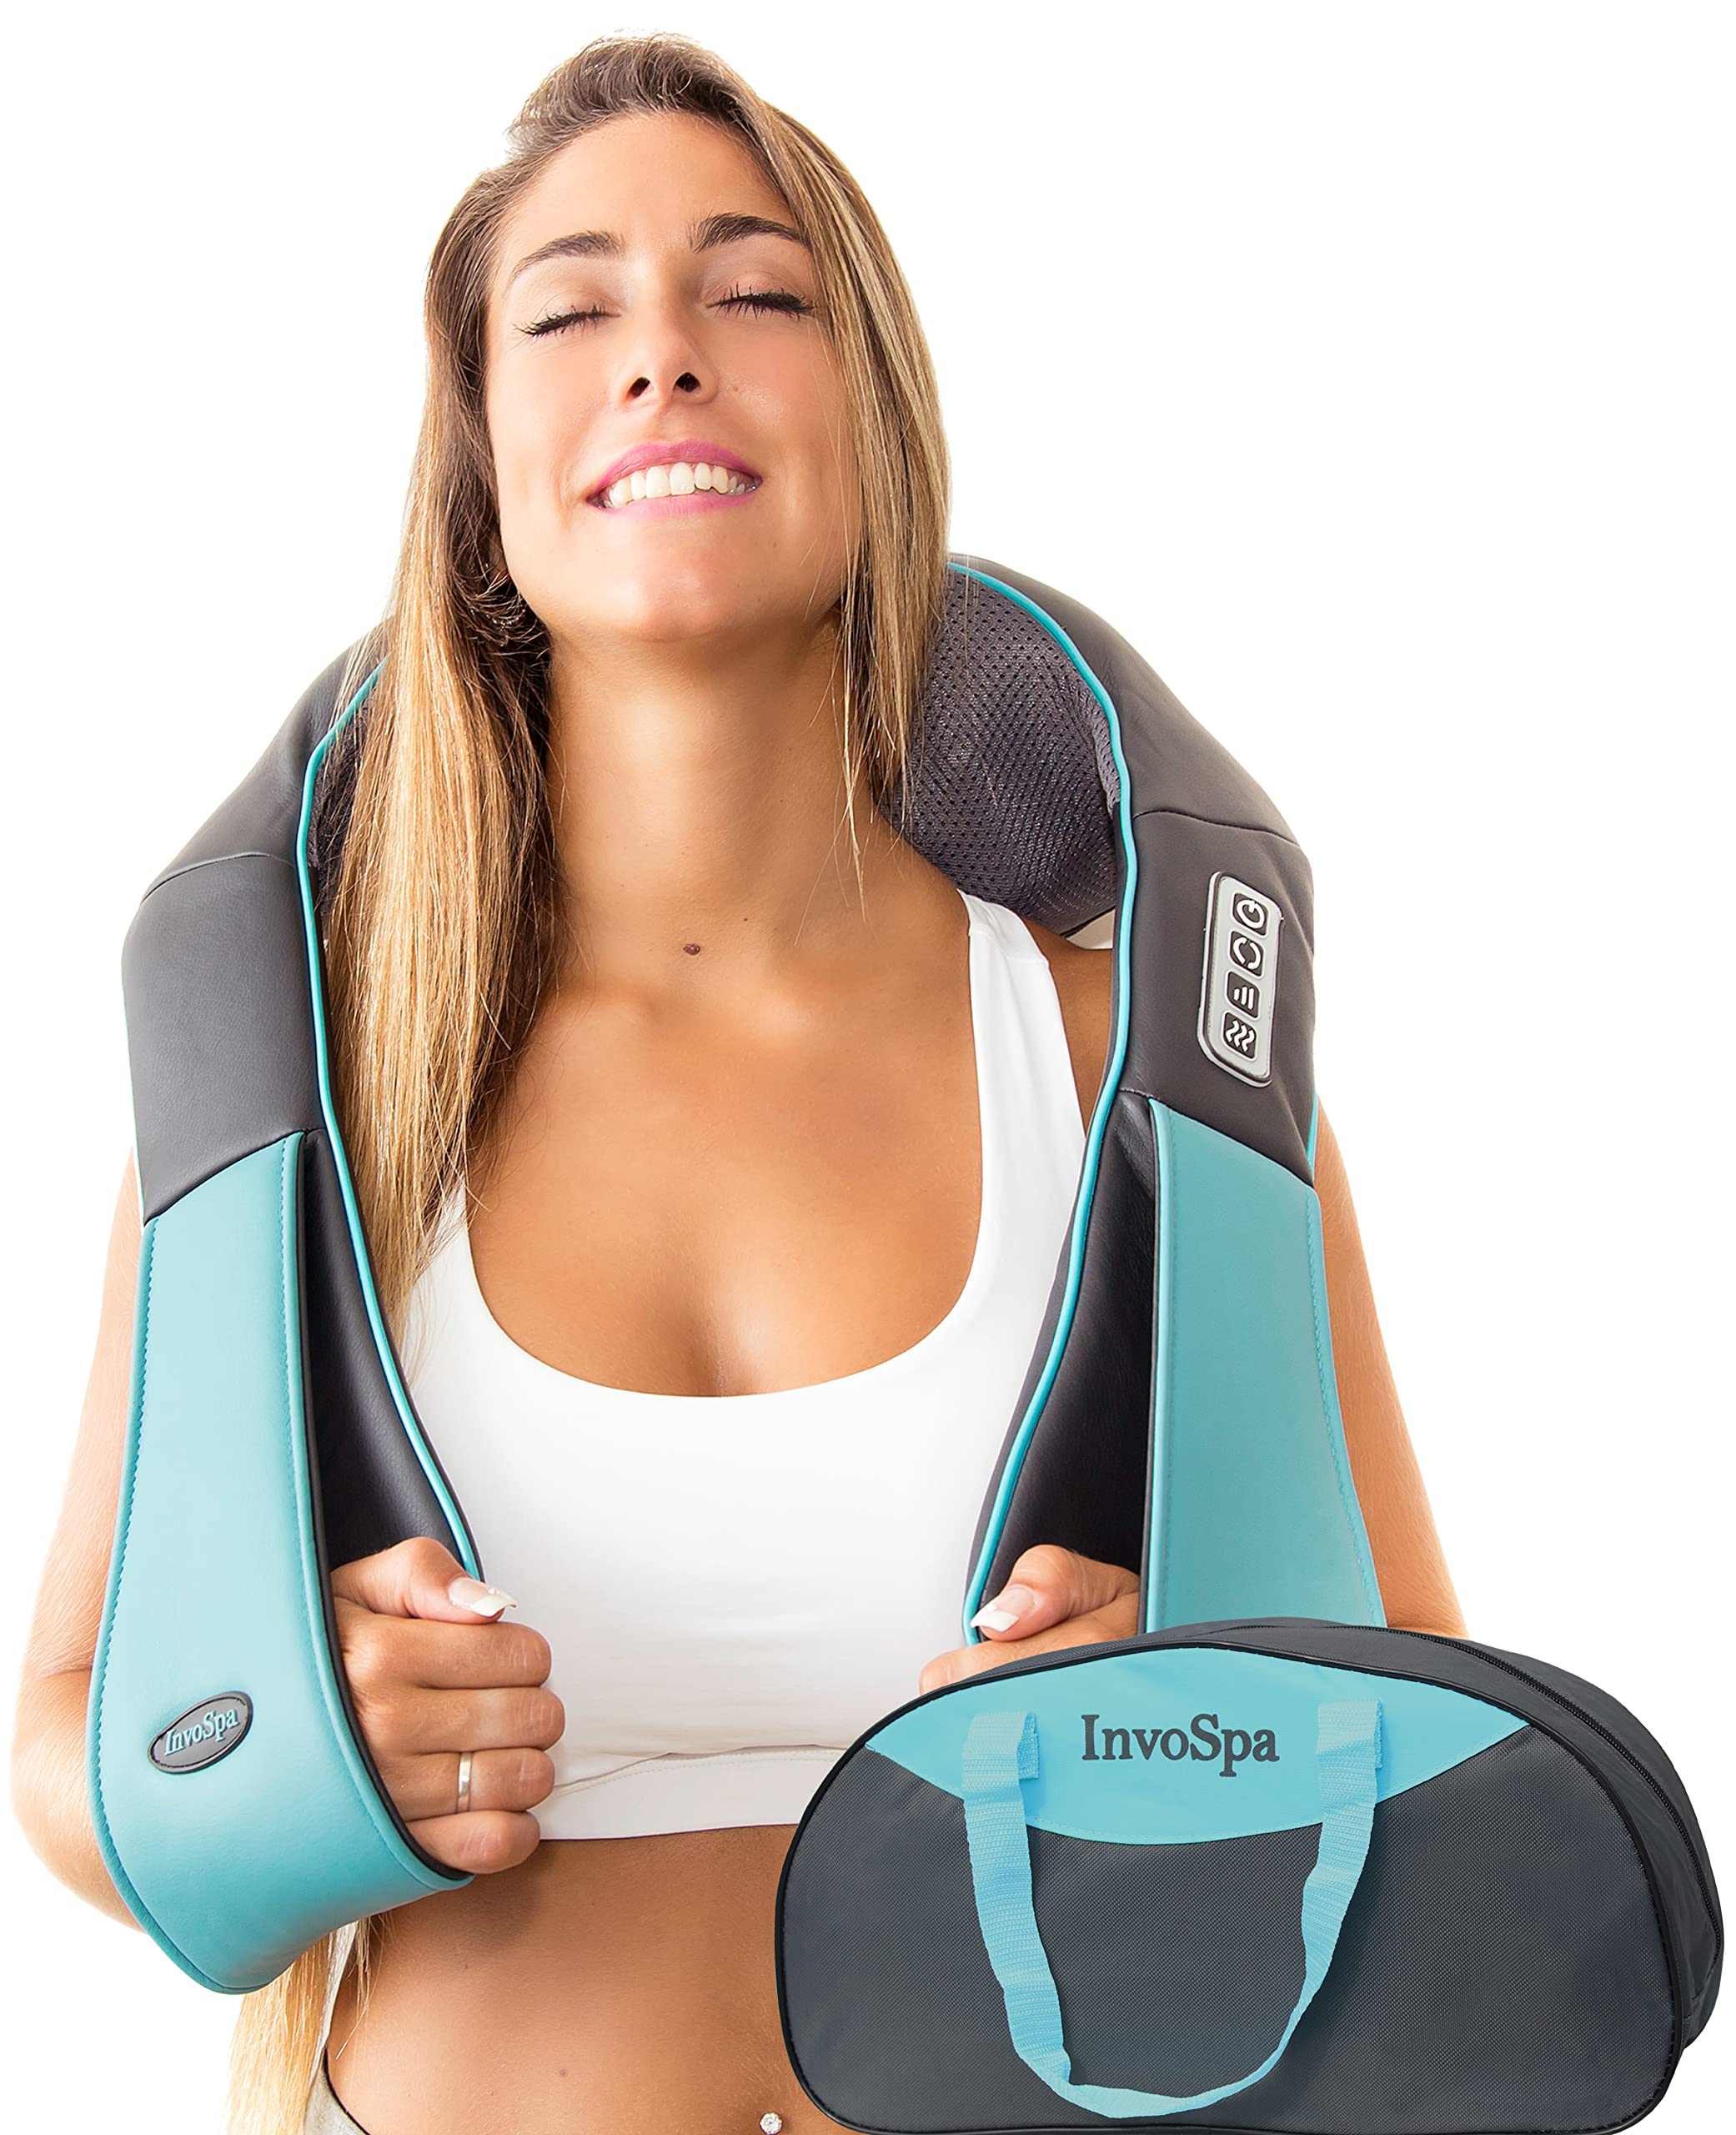 Blue Elf Shiatsu Neck Massager, Shiatsu Back Shoulder Massager with Heat,  Electric Kneading Massage Pillow for Back,Shoulder, Foot, Leg Muscles Pain  Relief Relax in Car, Office and Home